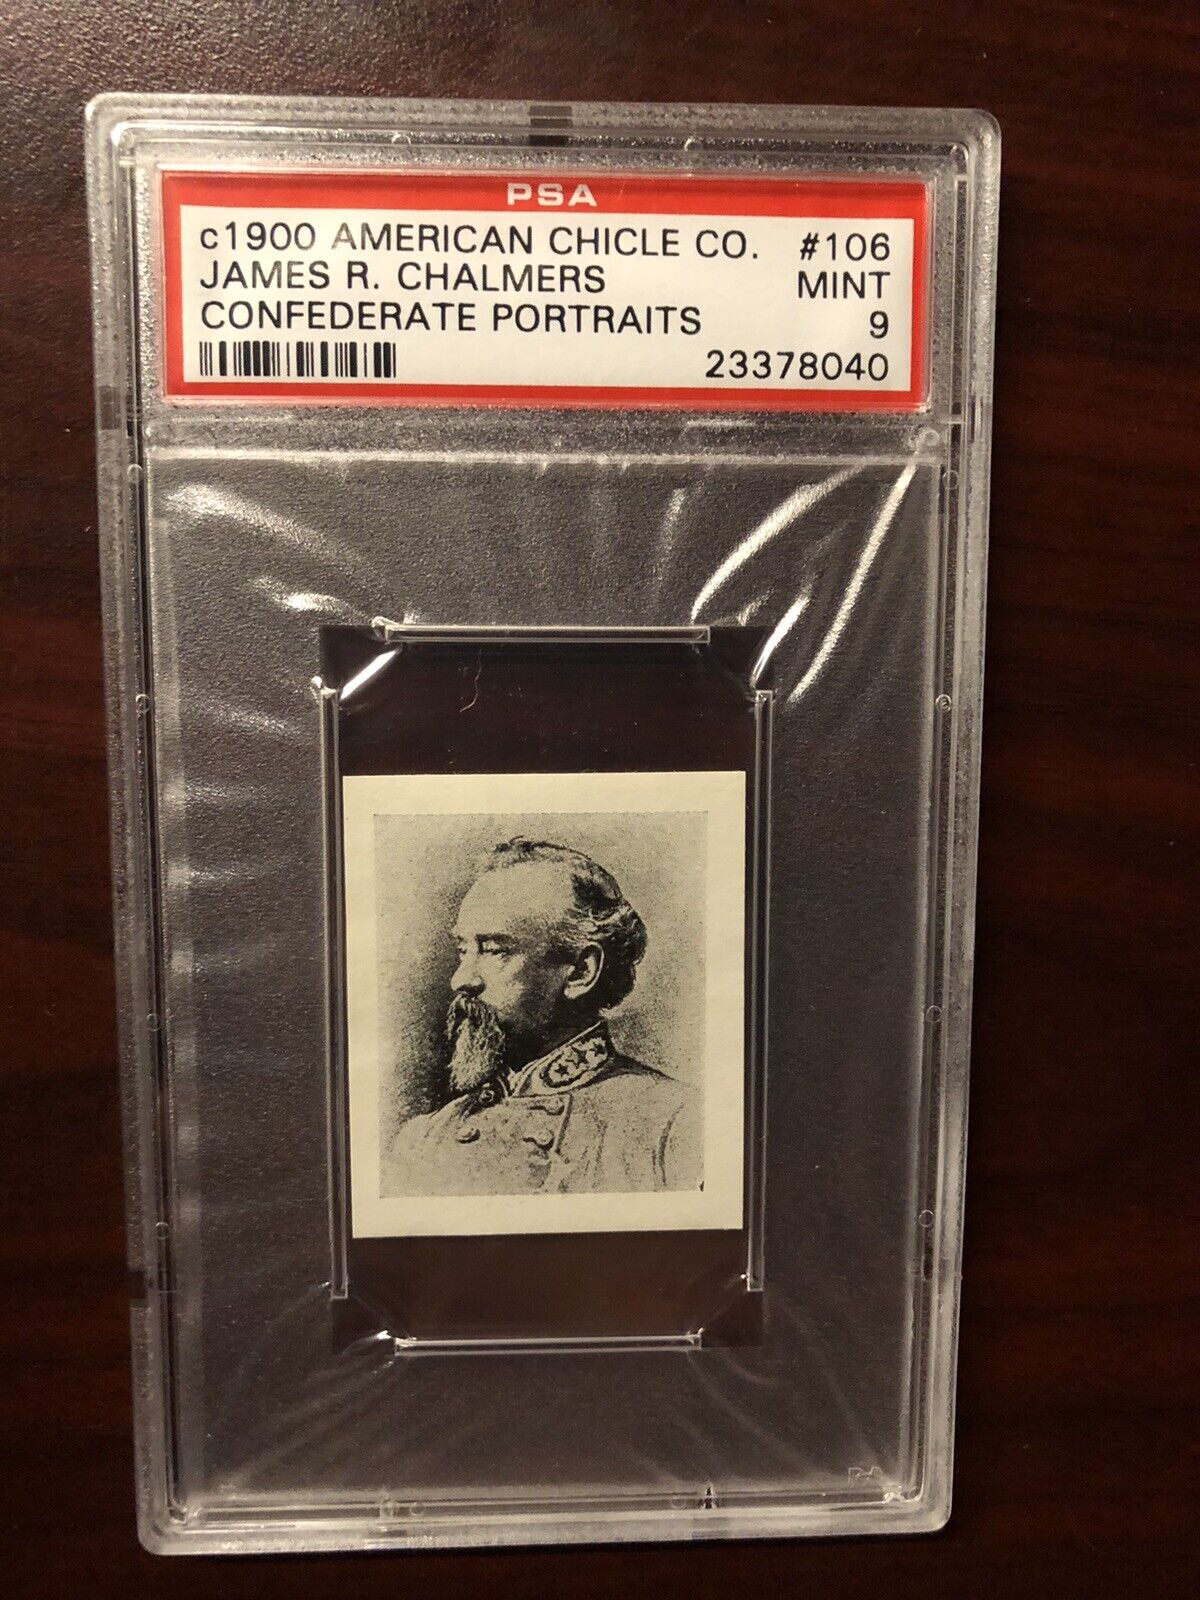 1900 AMERICAN CHICLE CONFEDERATE PORTRAITS #106 JAMES CHALMERS PSA 9 MINT POP 1 American Chicle Co.